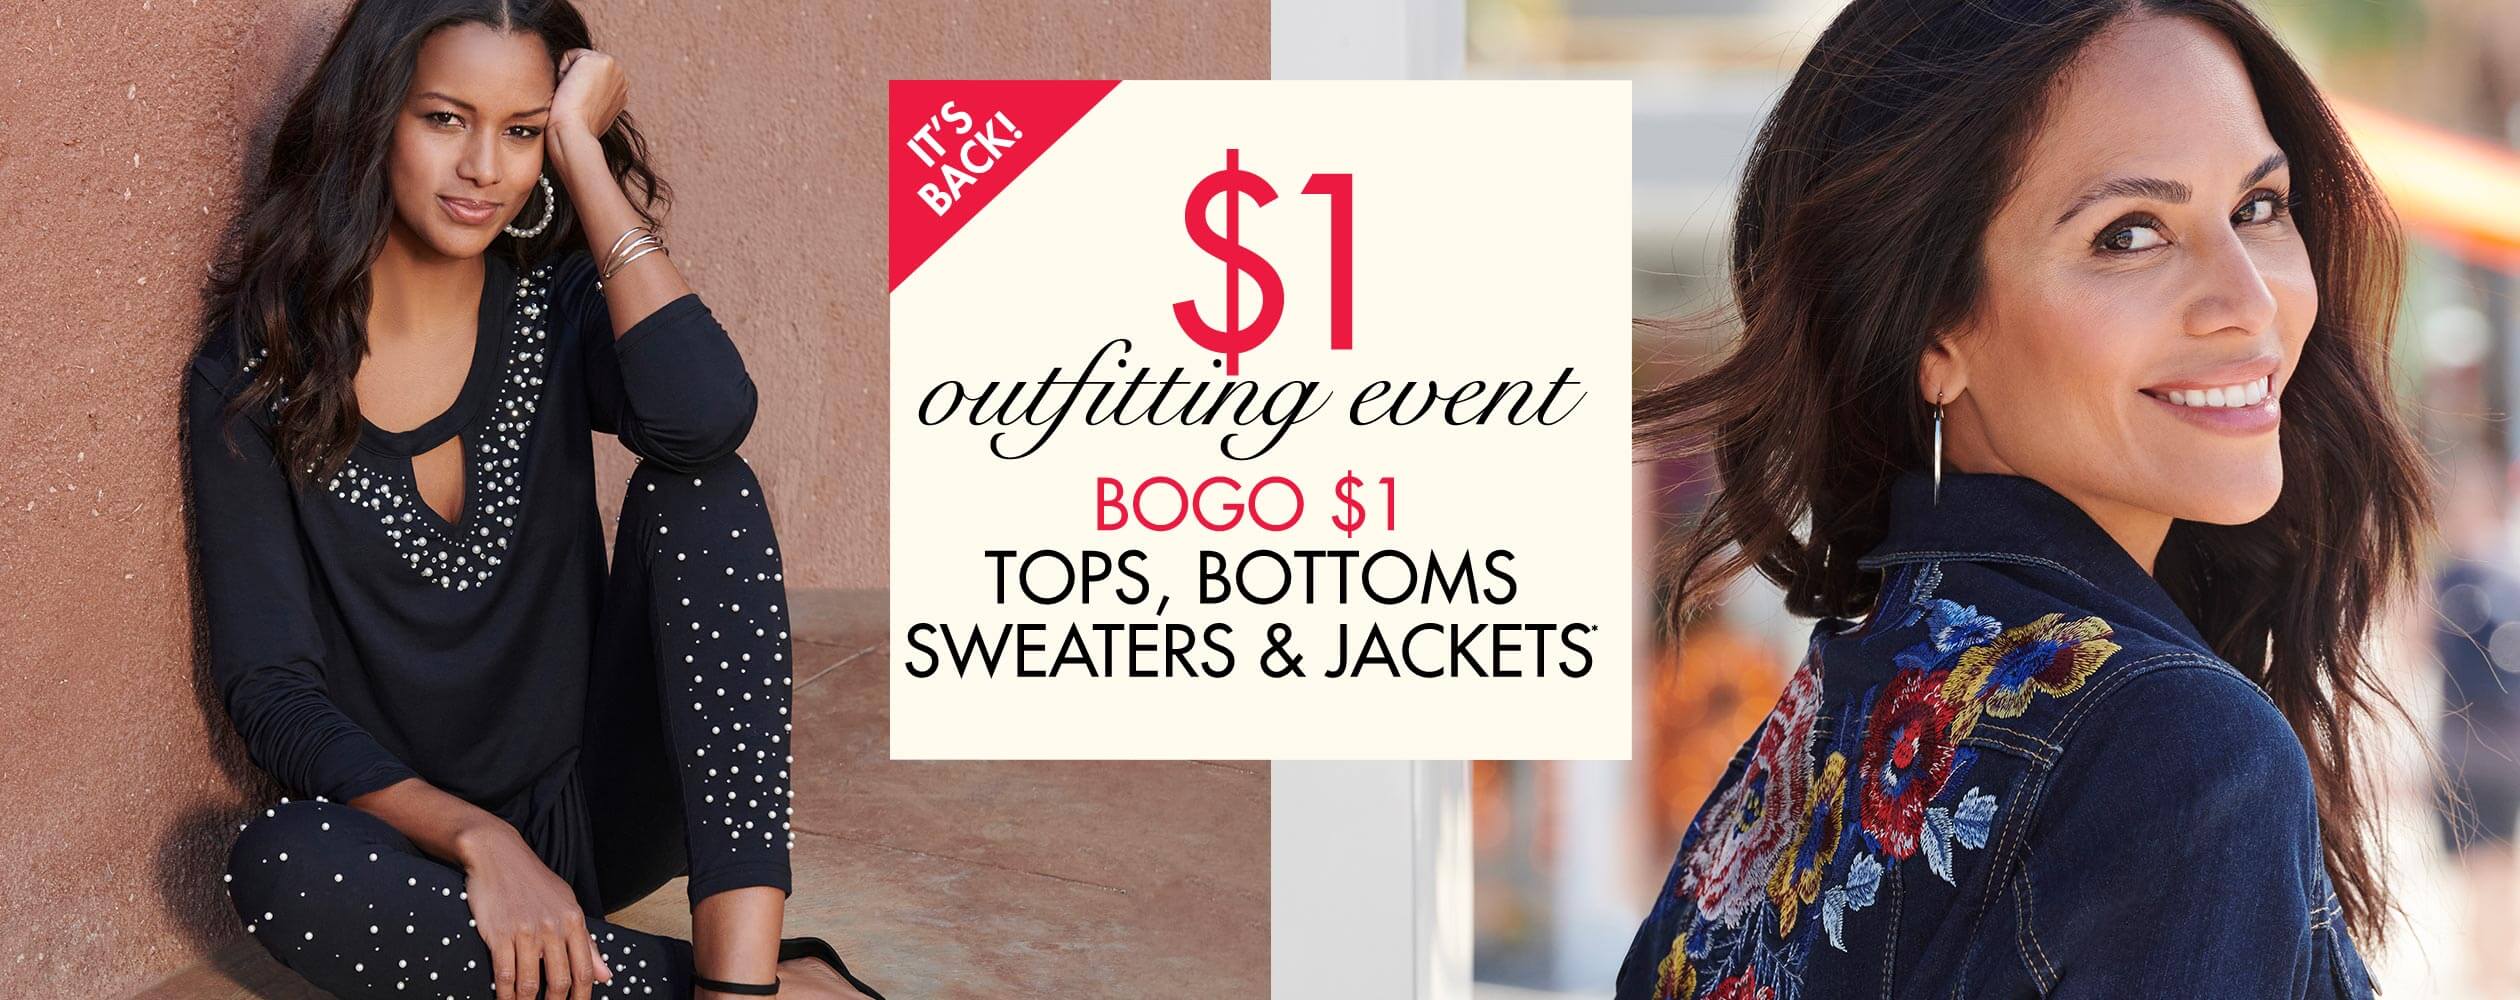 Buy 1, Get 1 for $1 Tops, Bottoms, Sweaters and Jackets in sizes up to 44W